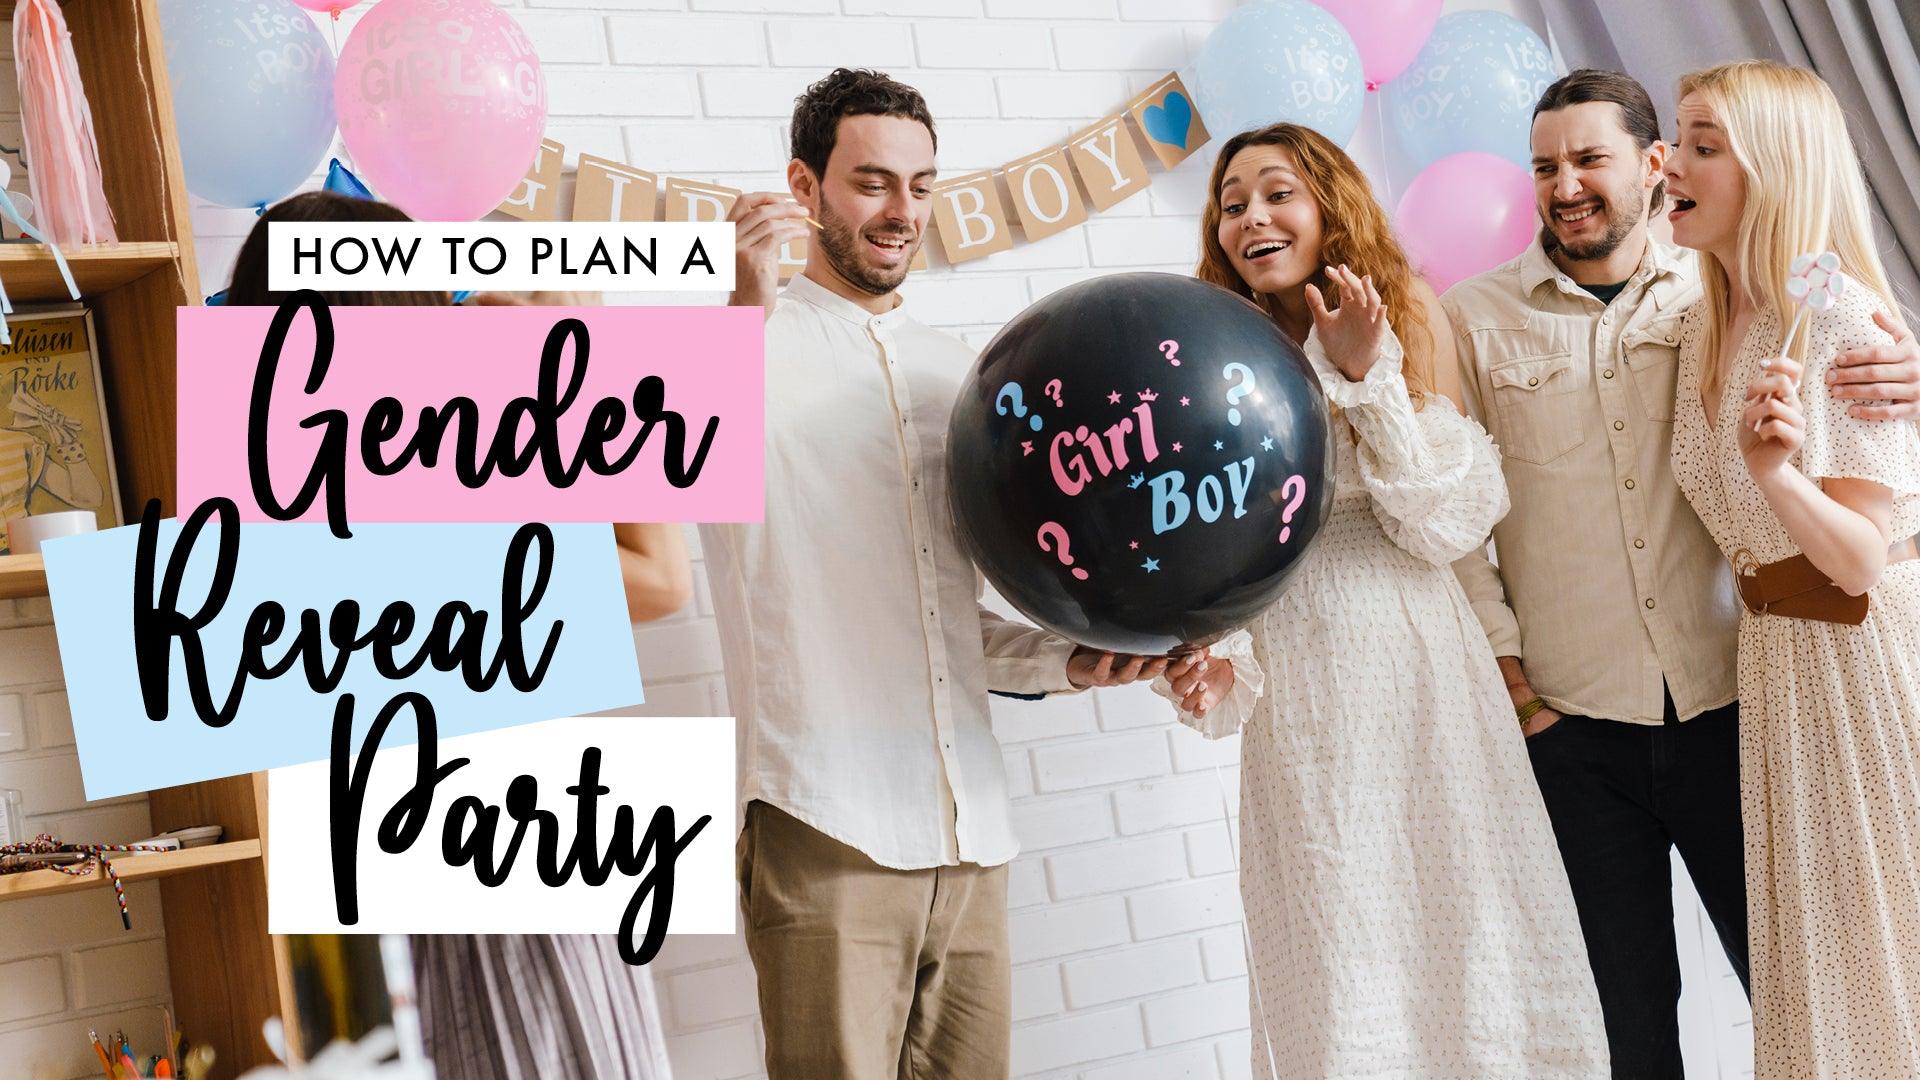 Organiser une Gender Reveal Party - My Happy Company